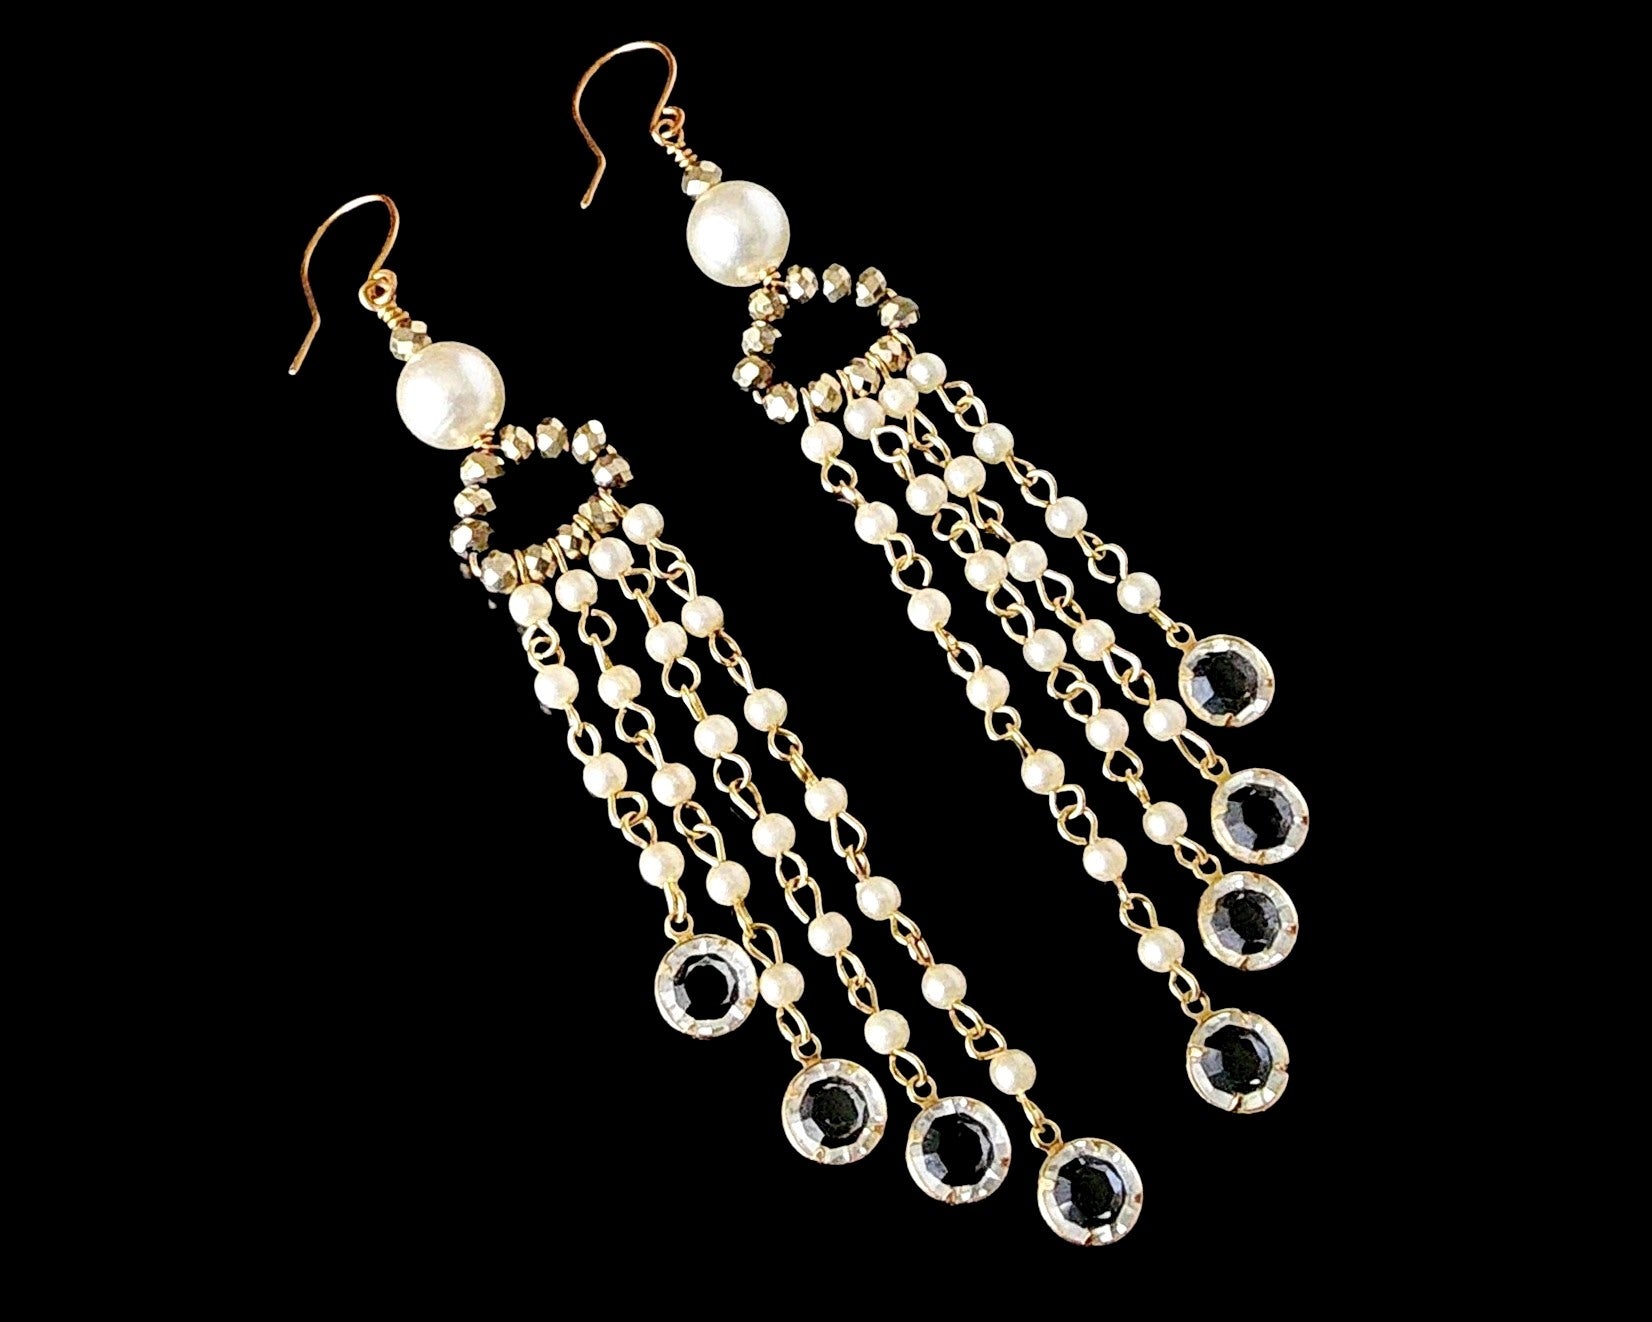 Long Eco Elegance Pearl Crystal Chandelier Tassel Earrings with long streams of tiny white pears and crystal pendants on the base of each strand, dangling from gold crystal and large white pearls. 